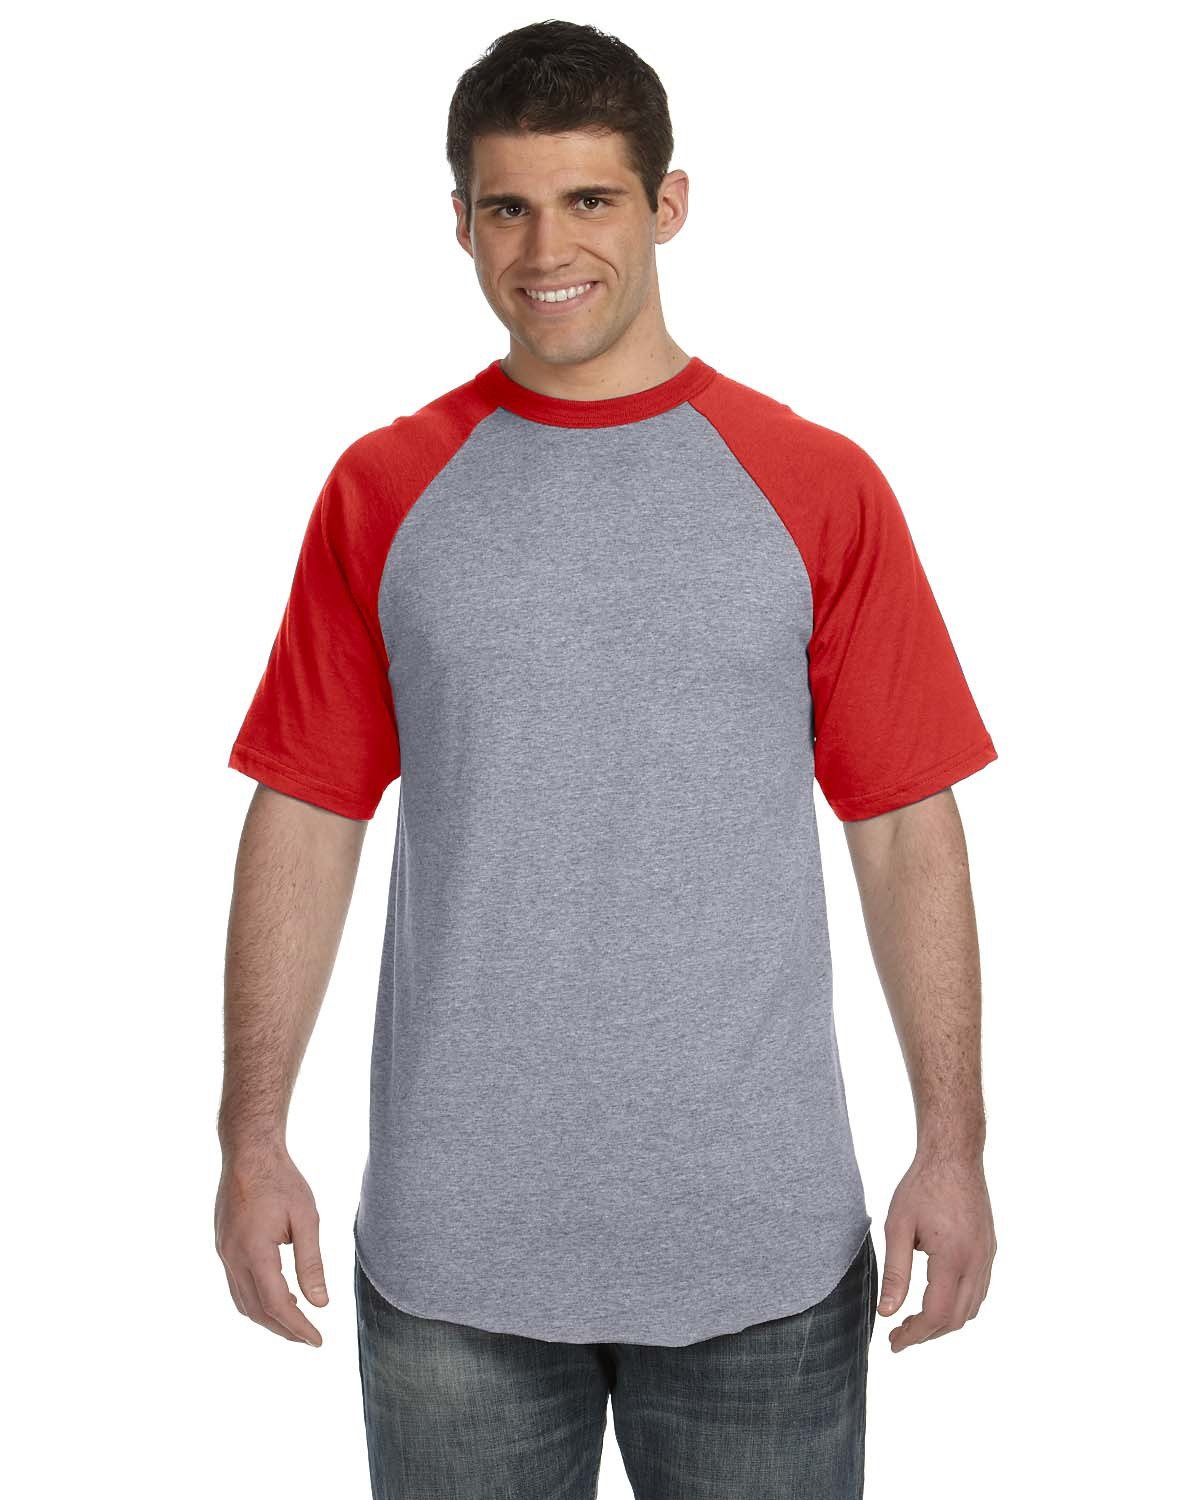 Front view of Adult Short-Sleeve Baseball Jersey